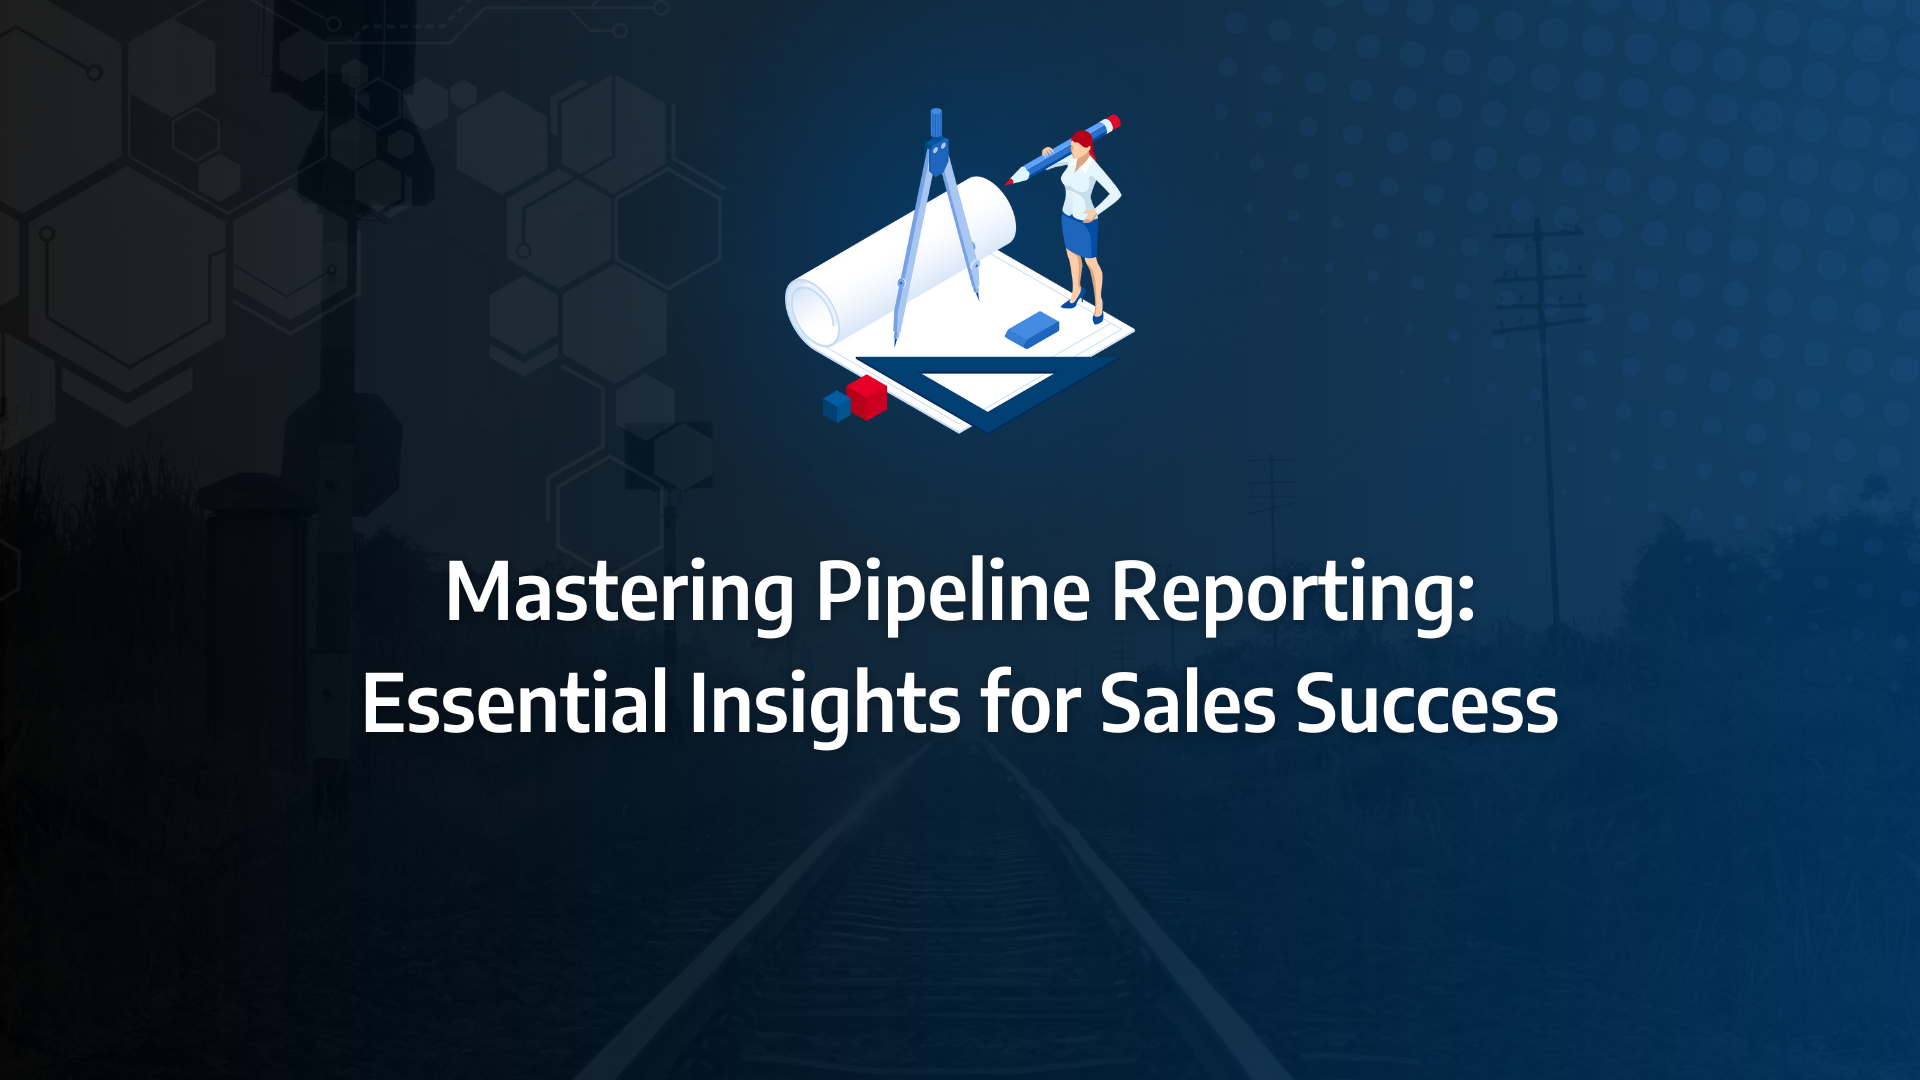 the ultimate guide to pipeline reporting incorporating sales pipelines, sales reps, sales forecasting, average sales cycles, sales performance